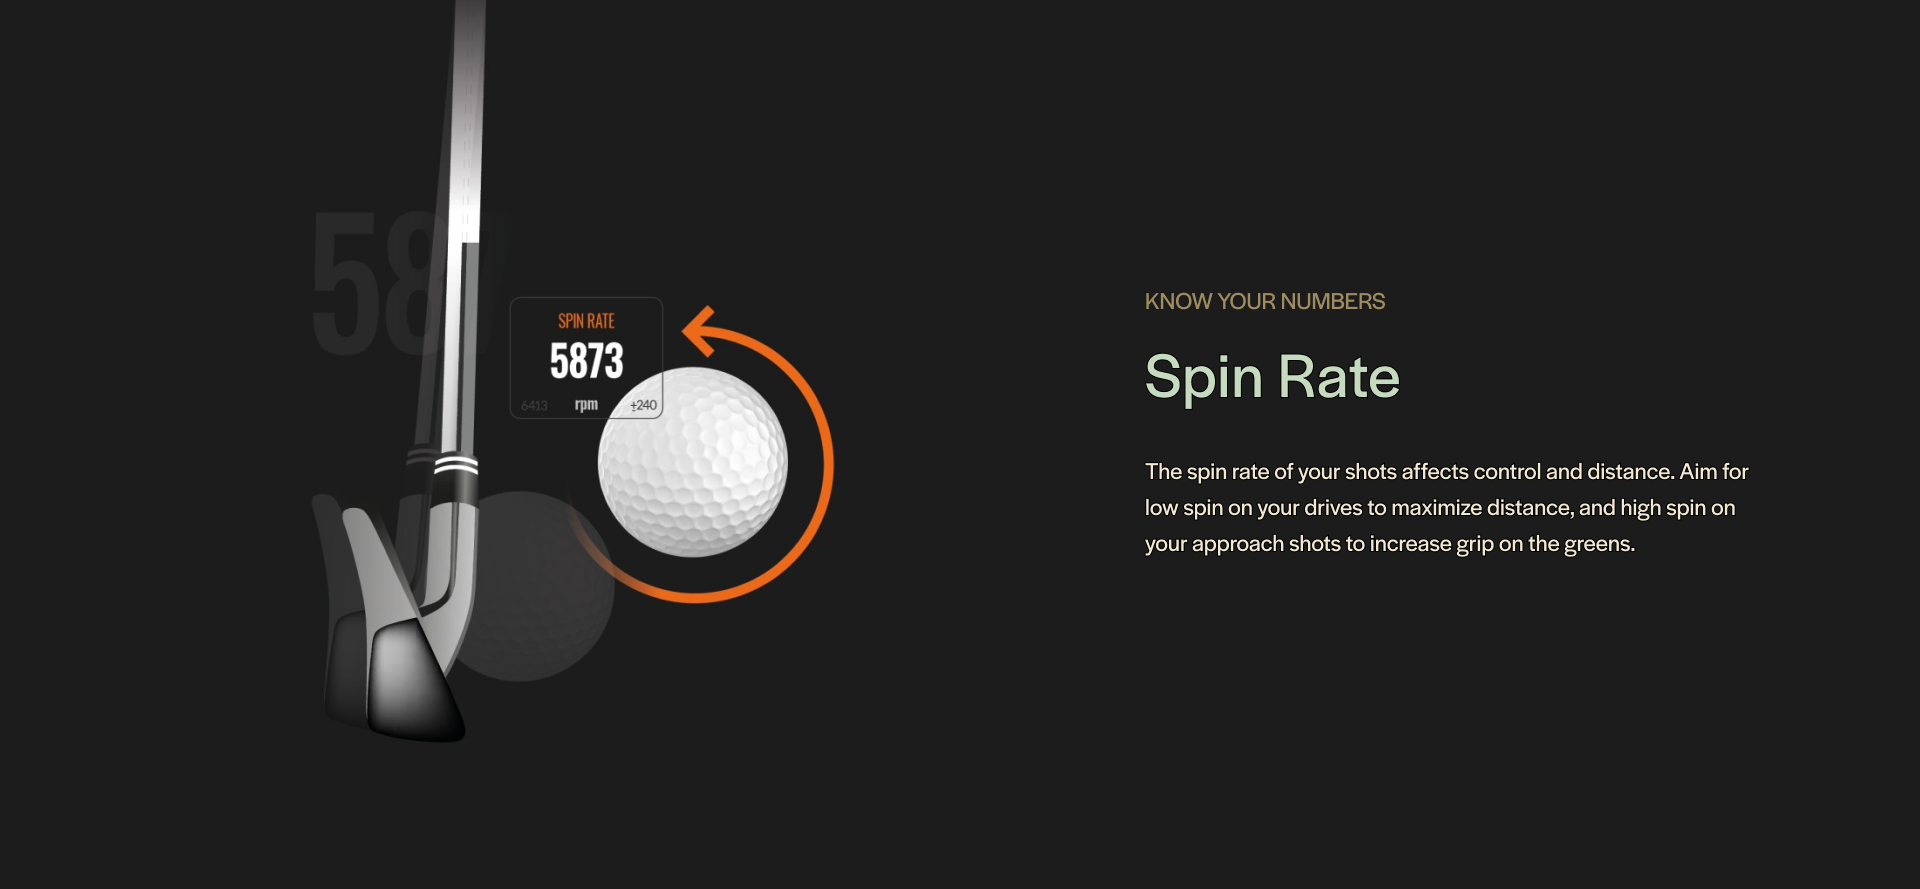 The spin rate of your shots affects control and distance. Aim for low spin on your drives to maximize distance, and high spin on your approach shots to increase grip on the game.